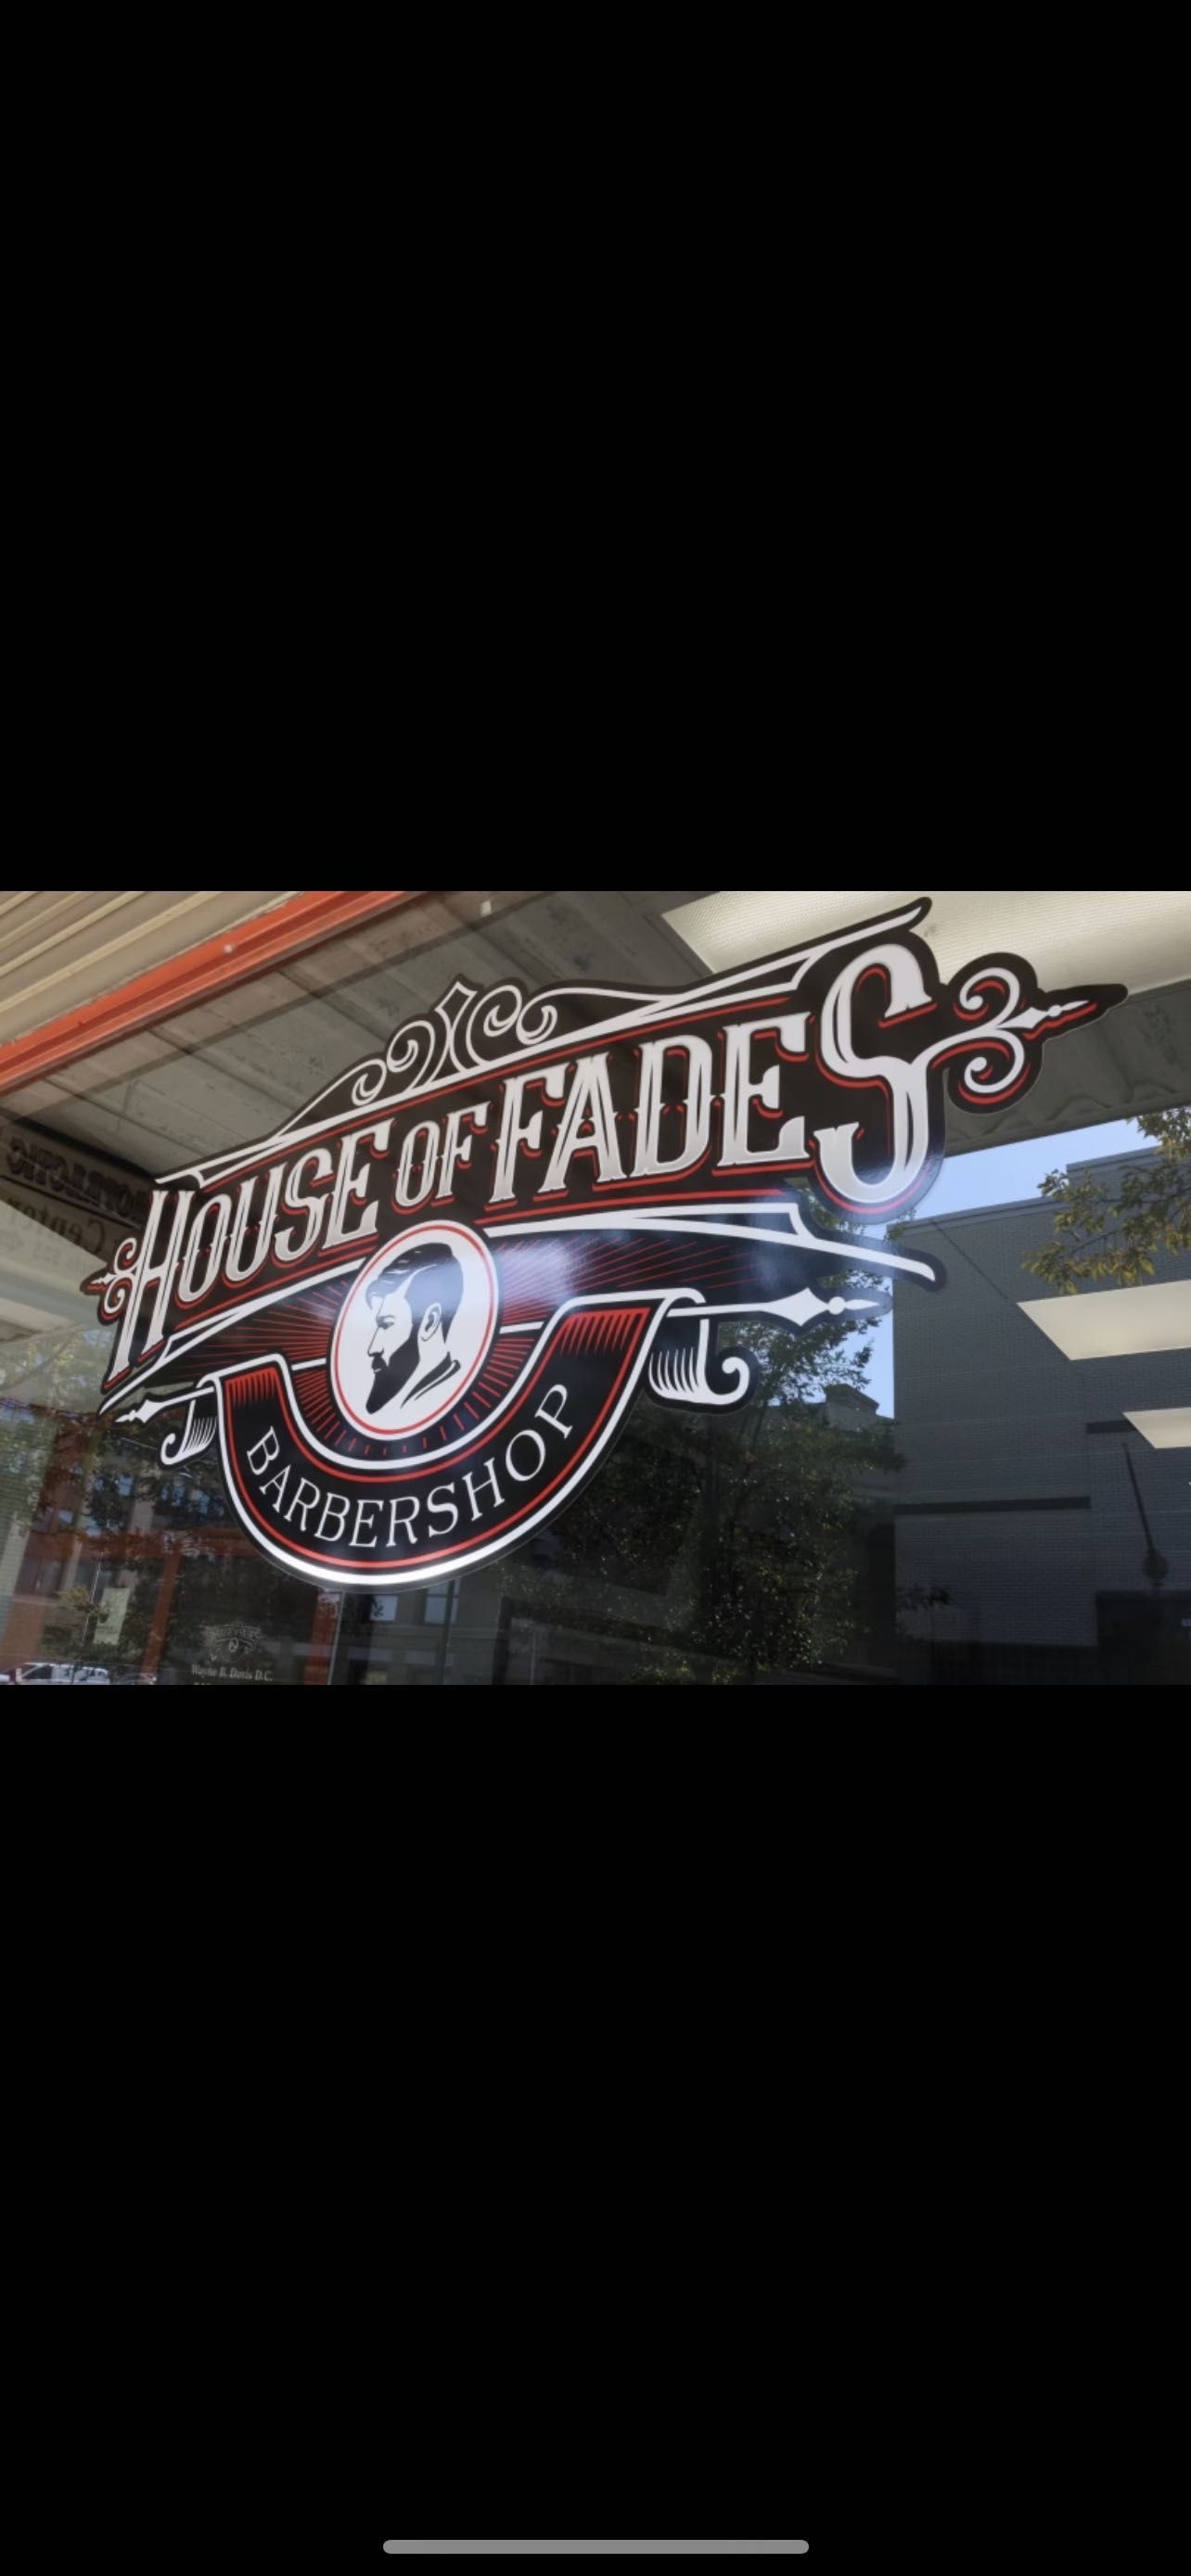 House Of Fade, 1715 5th Ave, Moline, 61265